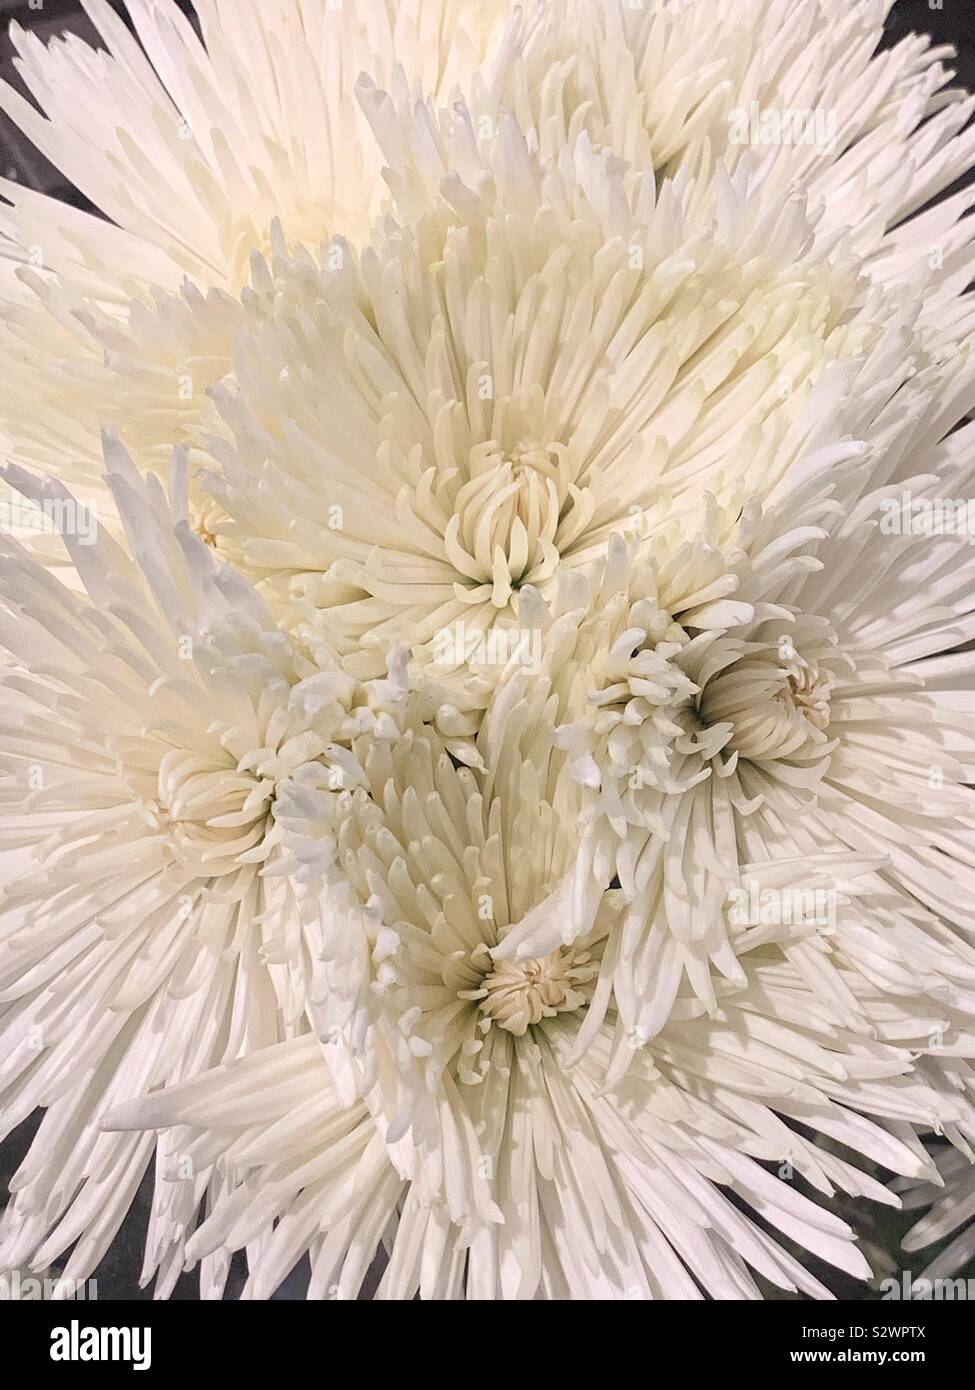 White chrysanthemums blossoms in full bloom. Stock Photo